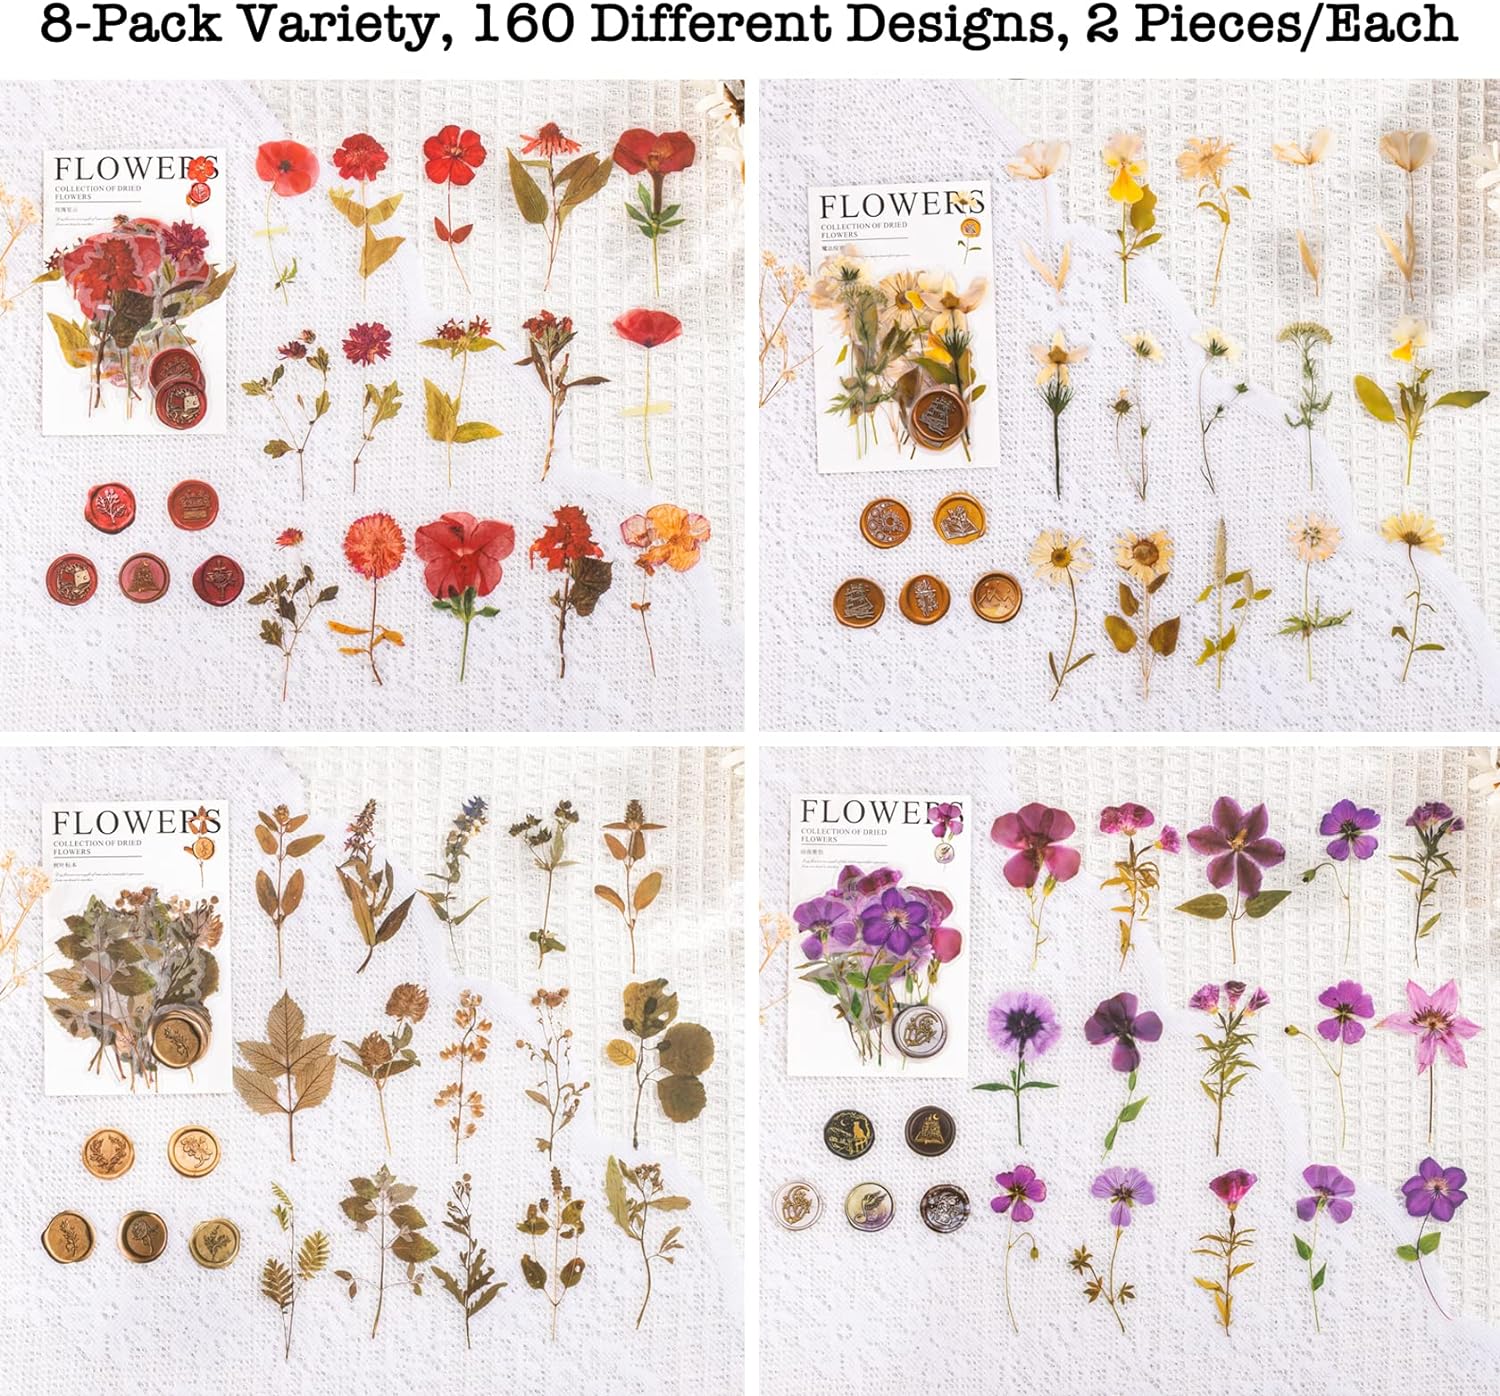 320 Pieces Pressed Flower Themed Stickers Set, Dried Flowers Resin Stickers Decals Floral Botanical Journaling